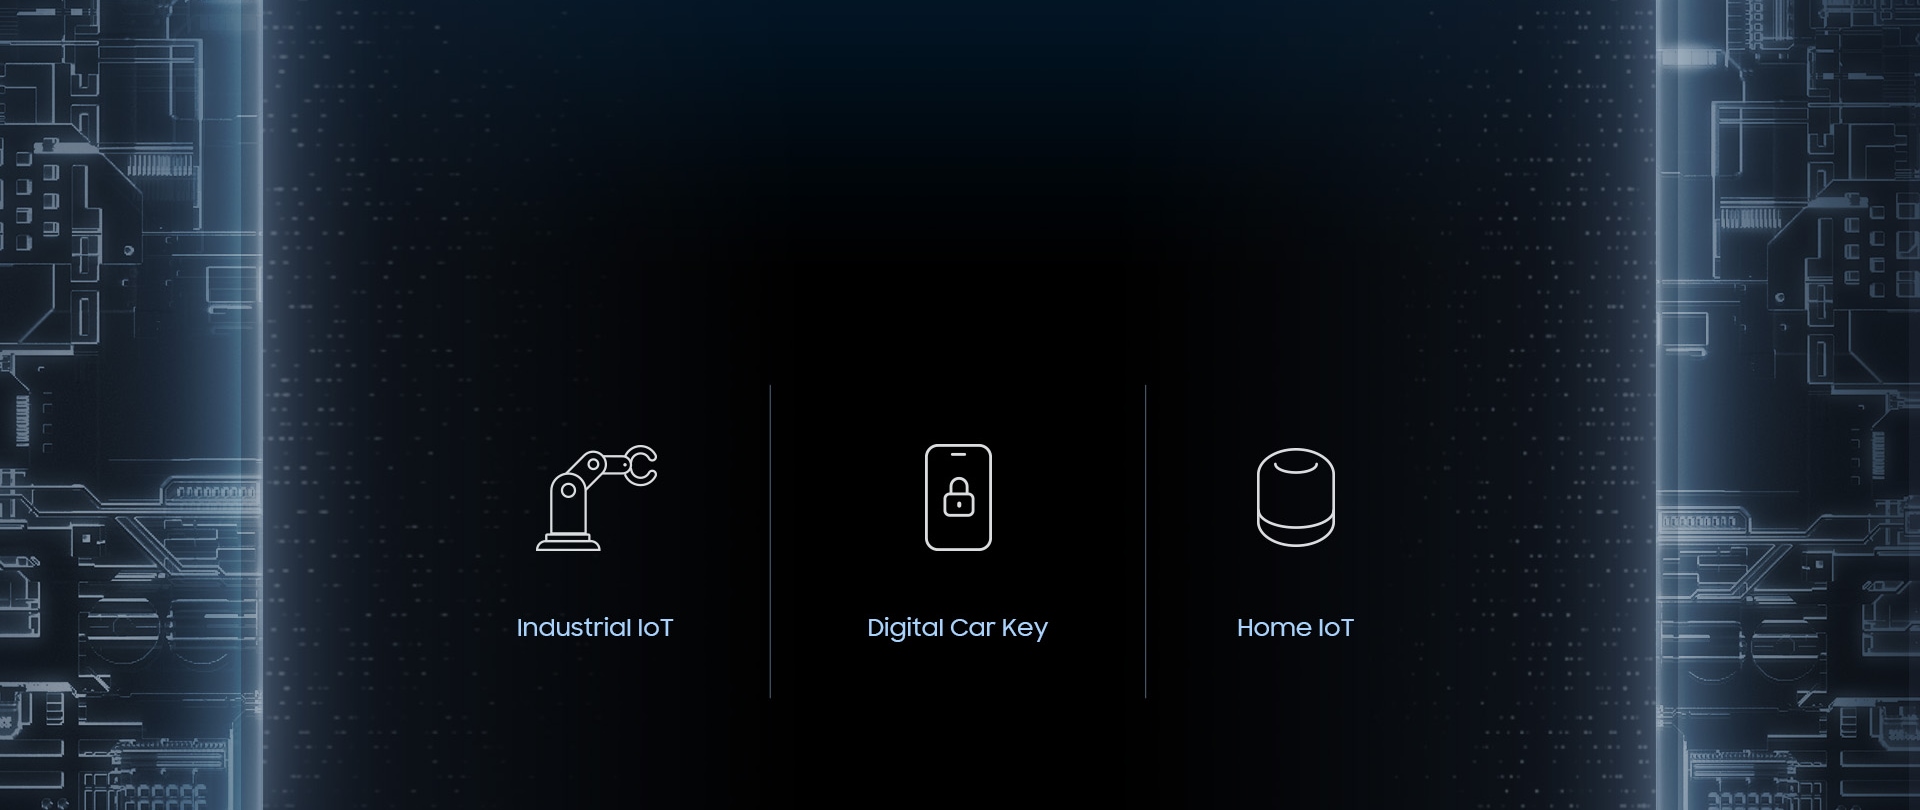 The Samsung Exynos Connect U100 facilitates smooth connectivity for a variety of applications, including smart homes, factories, and cars.